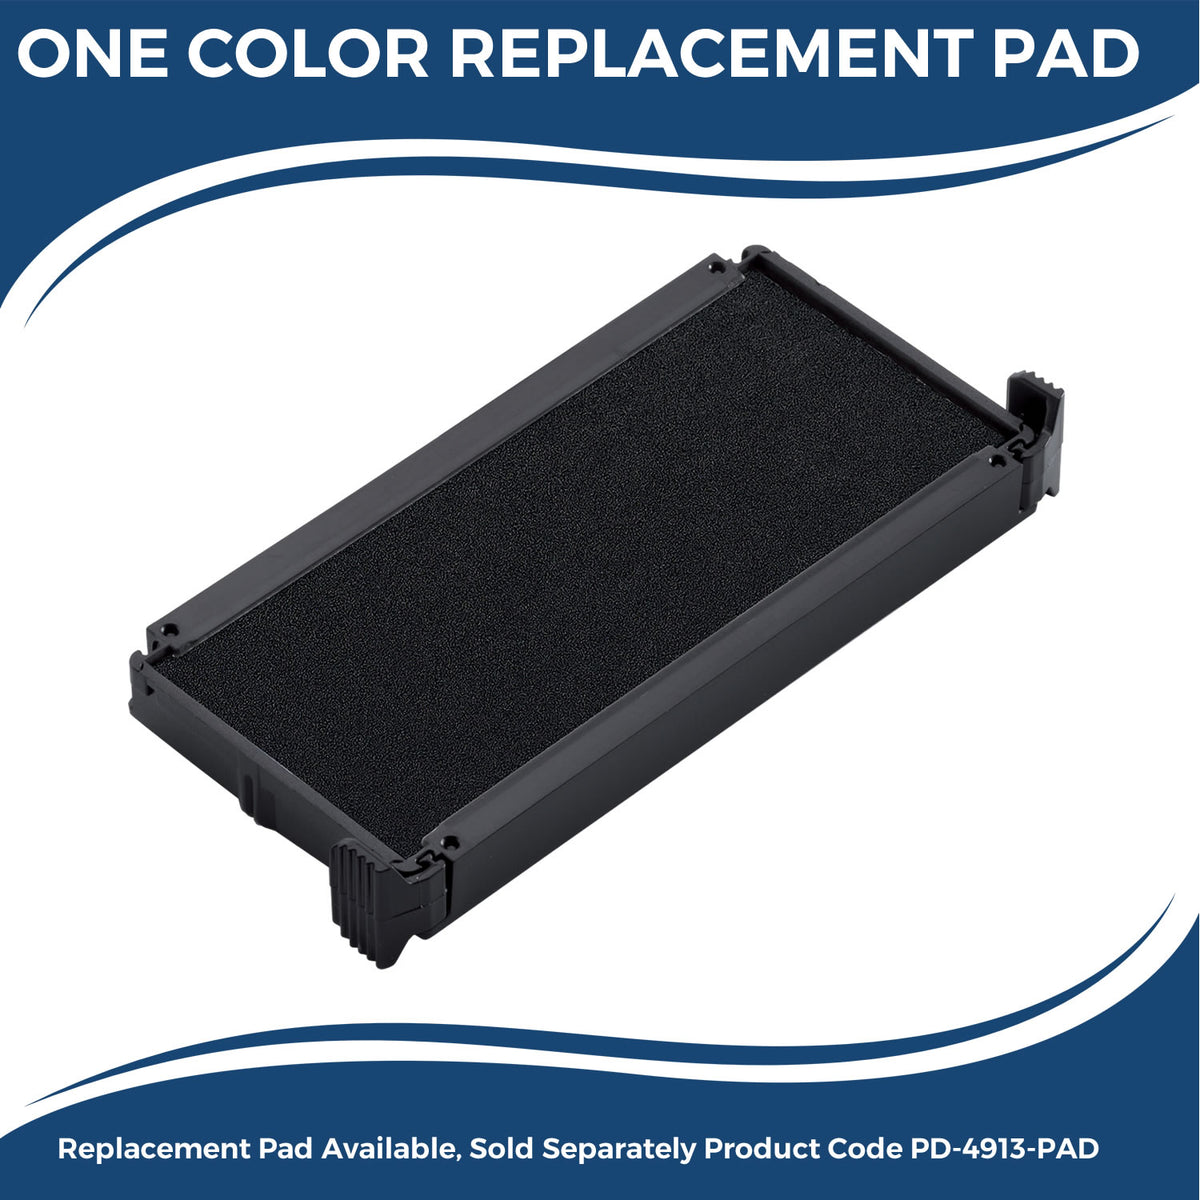 Large Self-Inking Anulado Stamp 5545S Large Replacment Pad